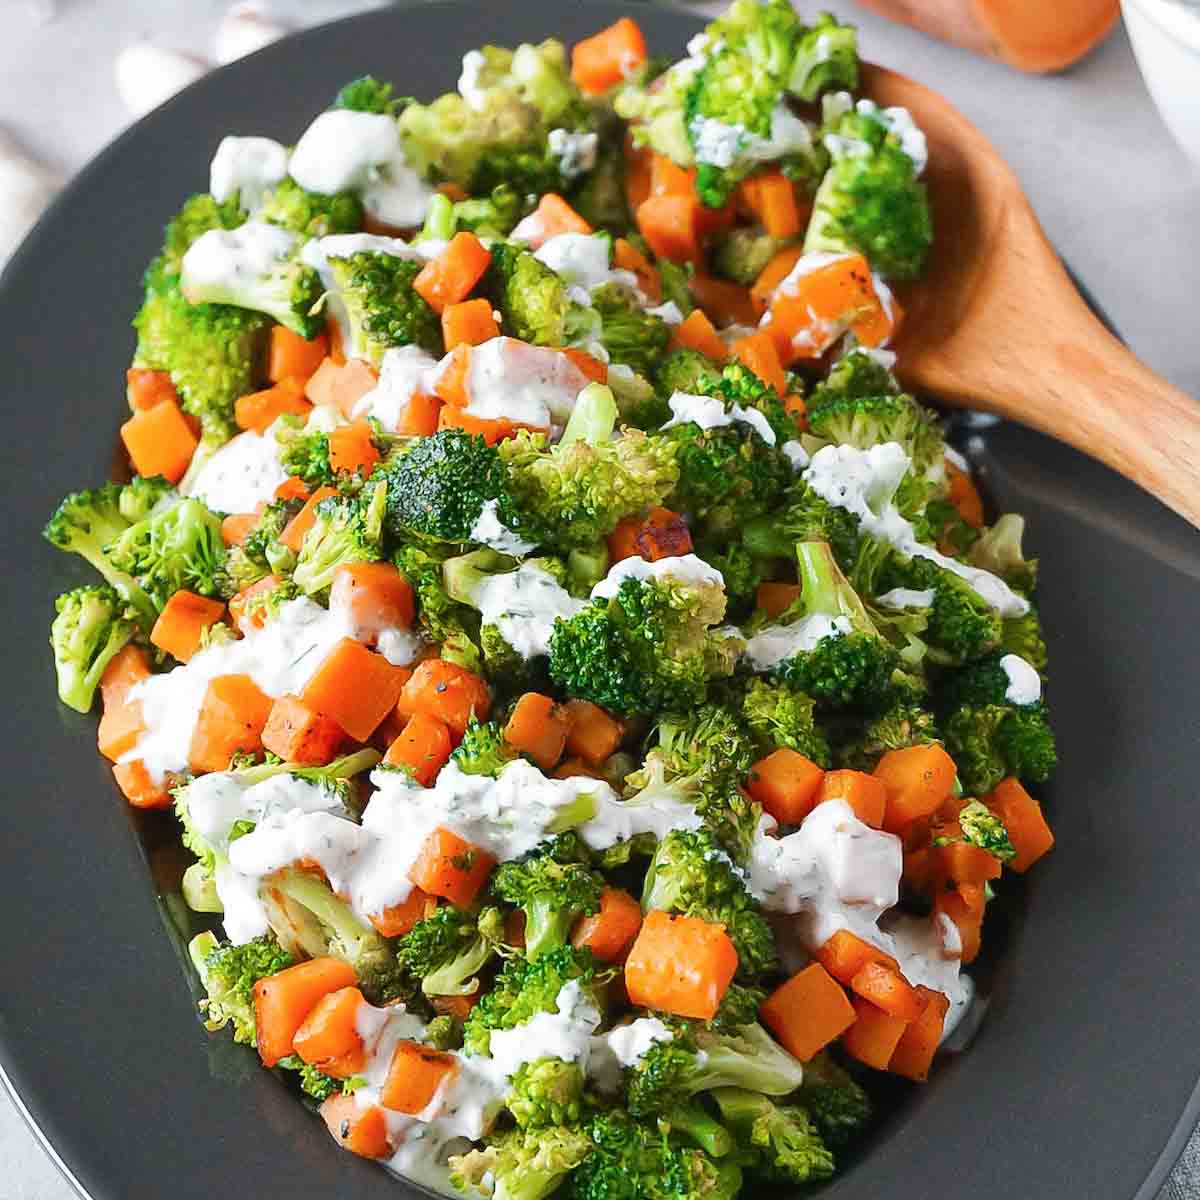 Oval plate full of broccoli with sweet potatoes, topped with creamy garlic ranch with dill.